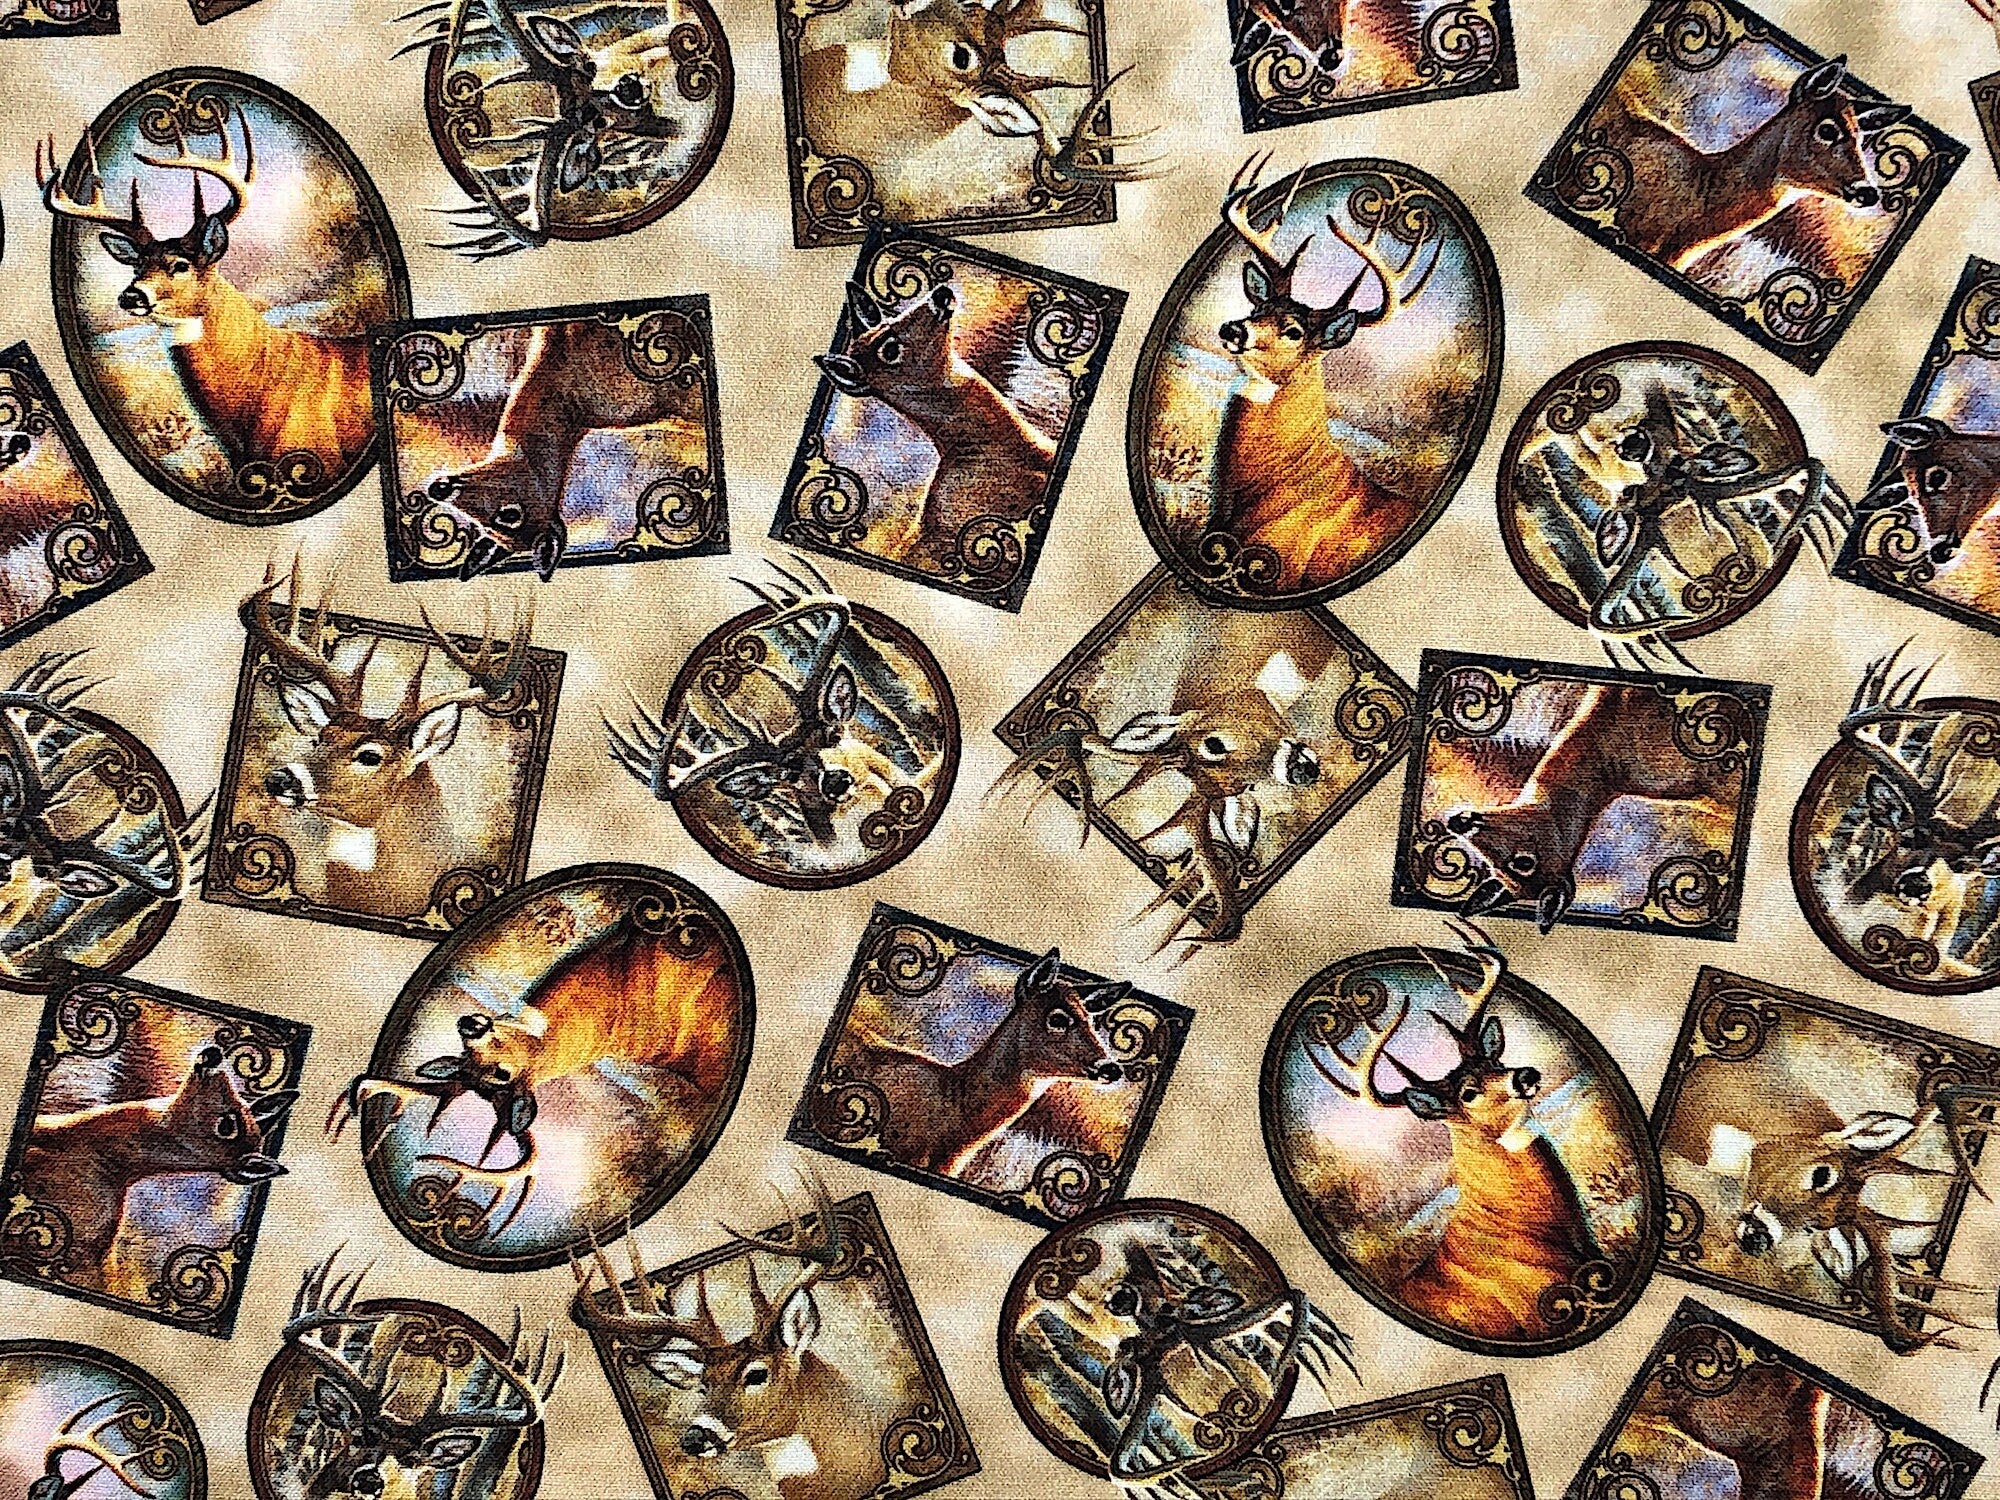 This tan fabric is called Deer Meadow and is covered with deer in different poses inside of picture frames.